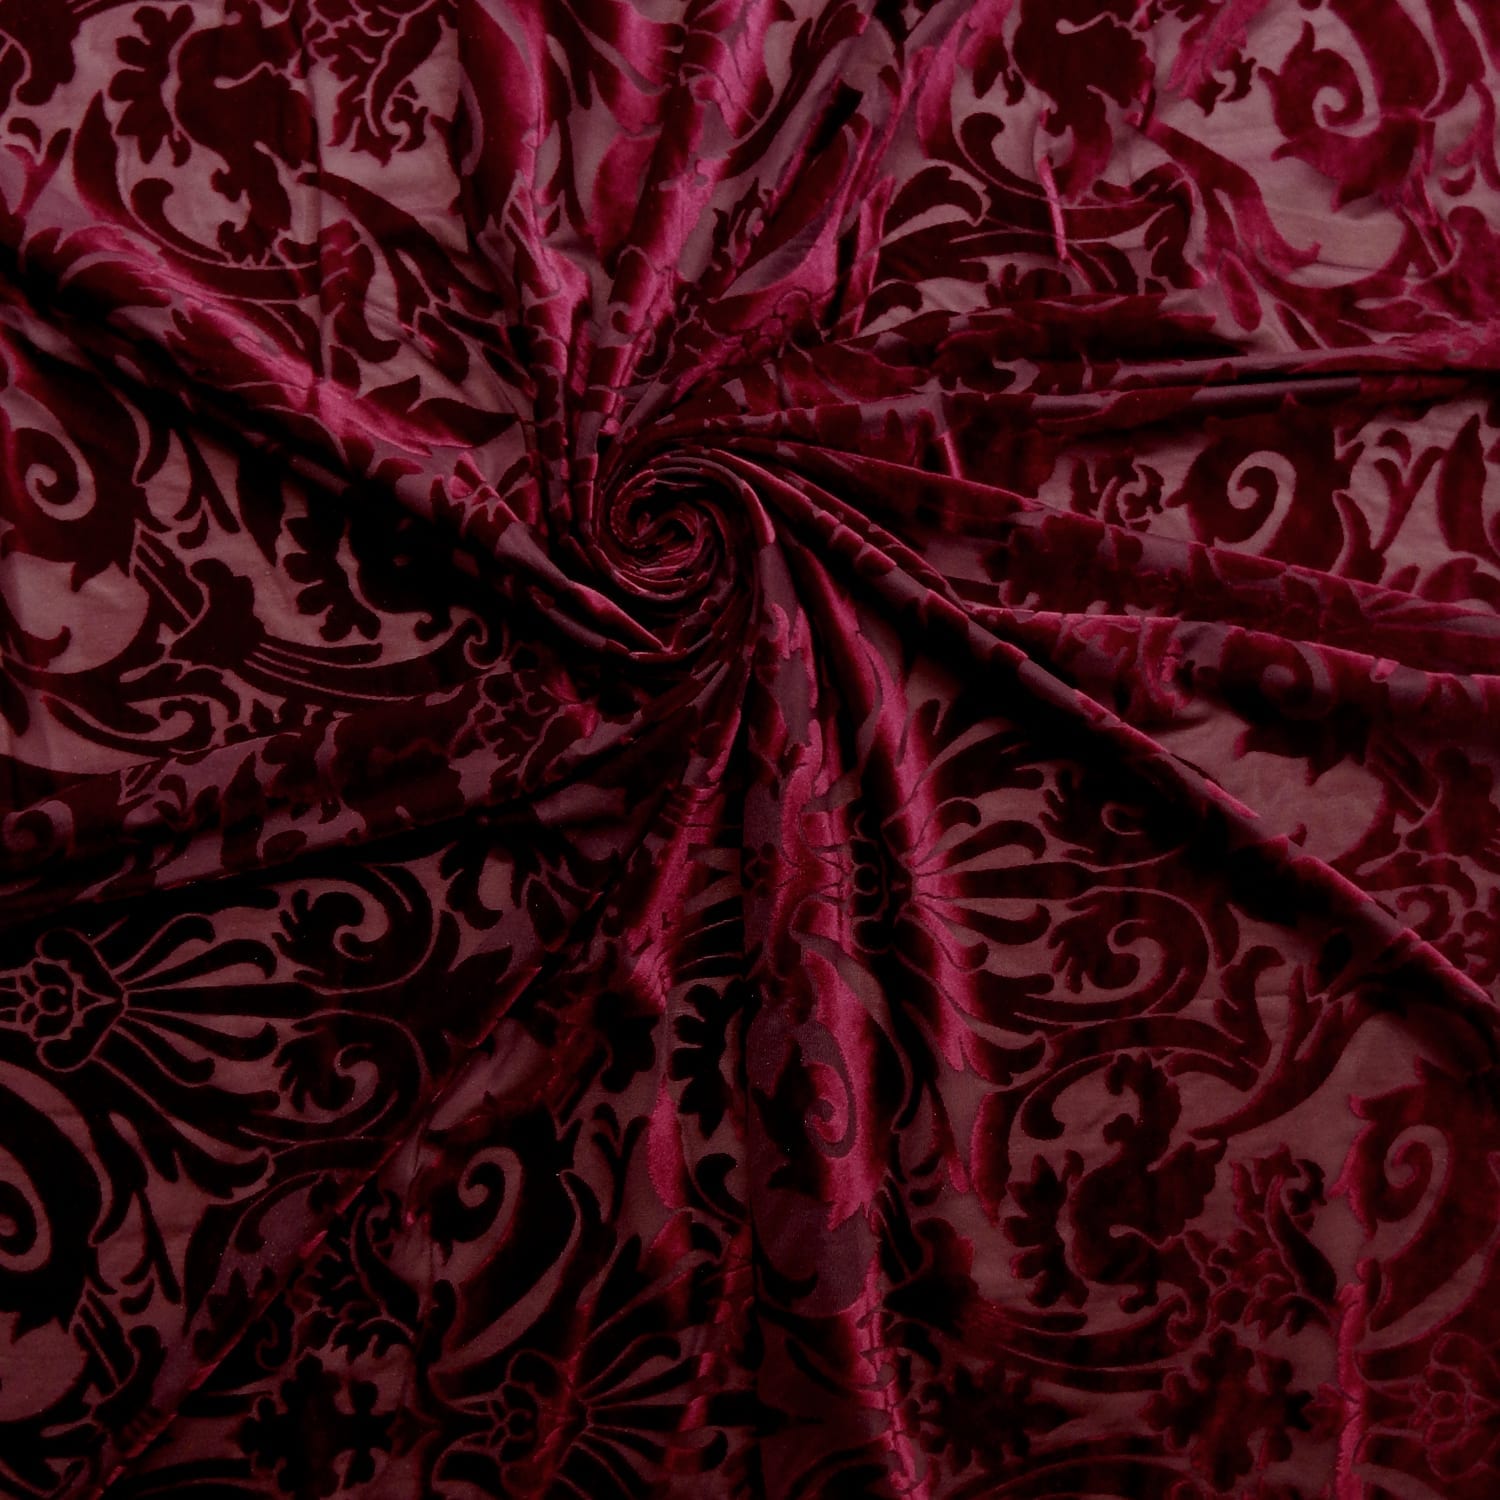 100% SILK VELVET BURNOUT BURGUNDY AND BURGUNDY FABRIC 45” WIDE BY THE YARD 